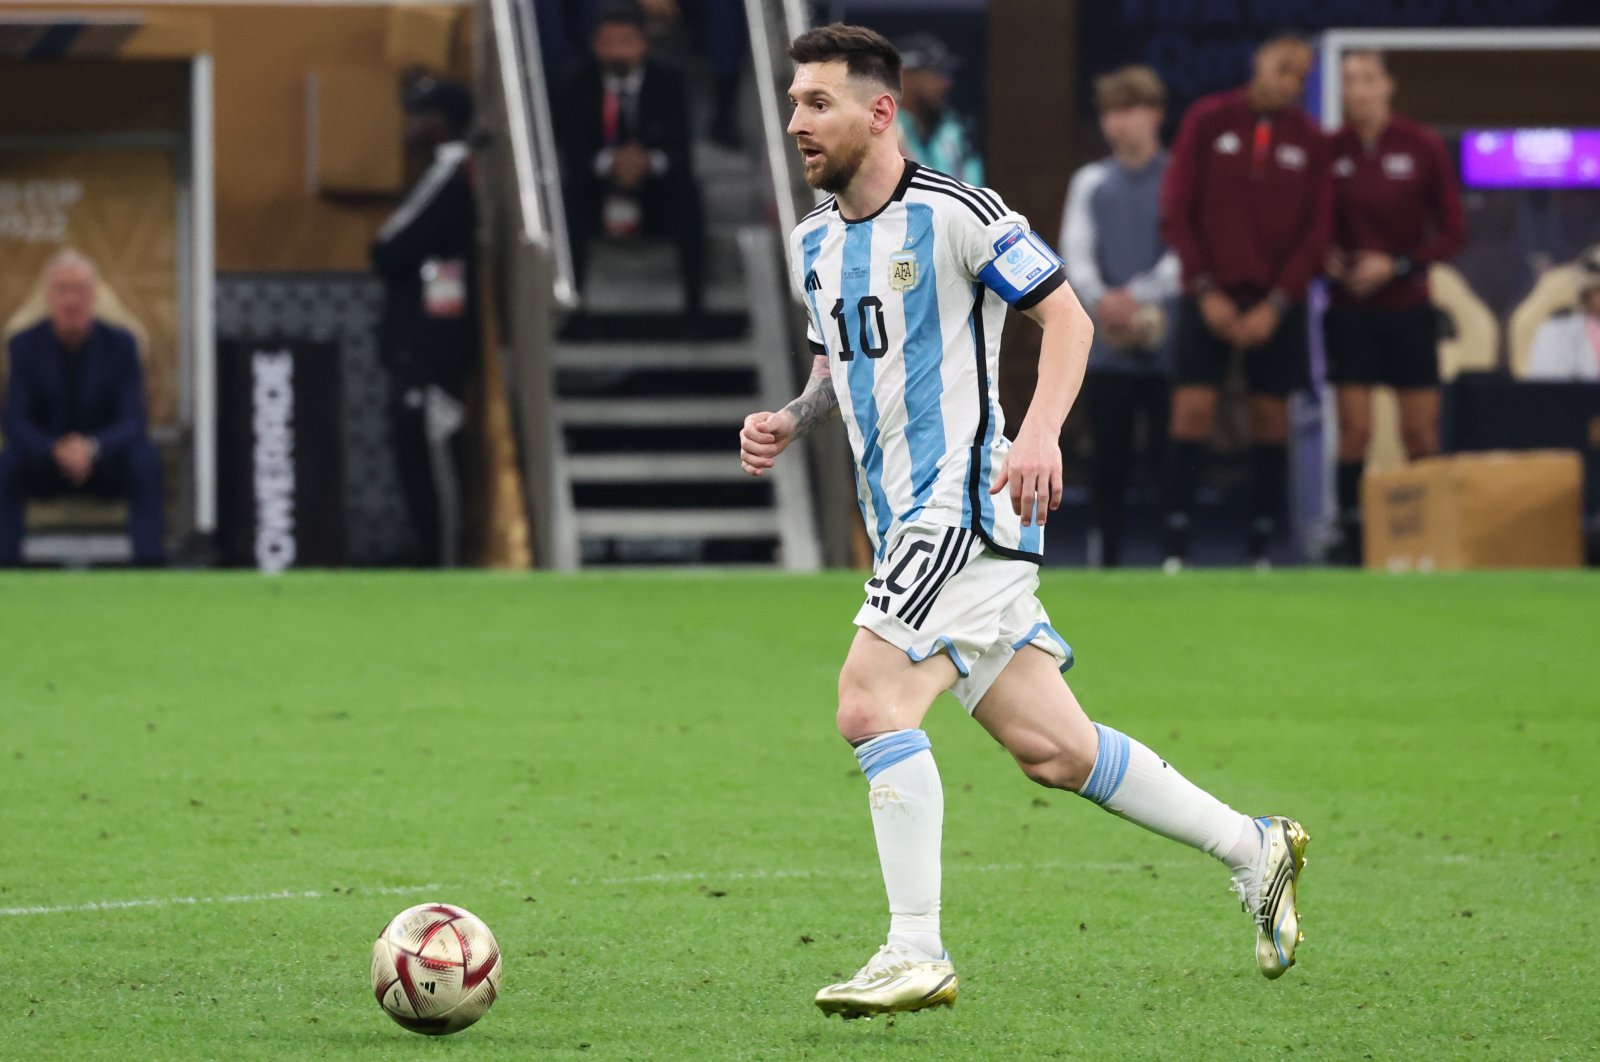 Argentina&#039;s Lionel Messi controls the ball during the FIFA World Cup Qatar 2022 Final match between Argentina and France at Lusail Stadium, Lusail, Qatar, Dec. 18, 2022. (Getty Images Photo)